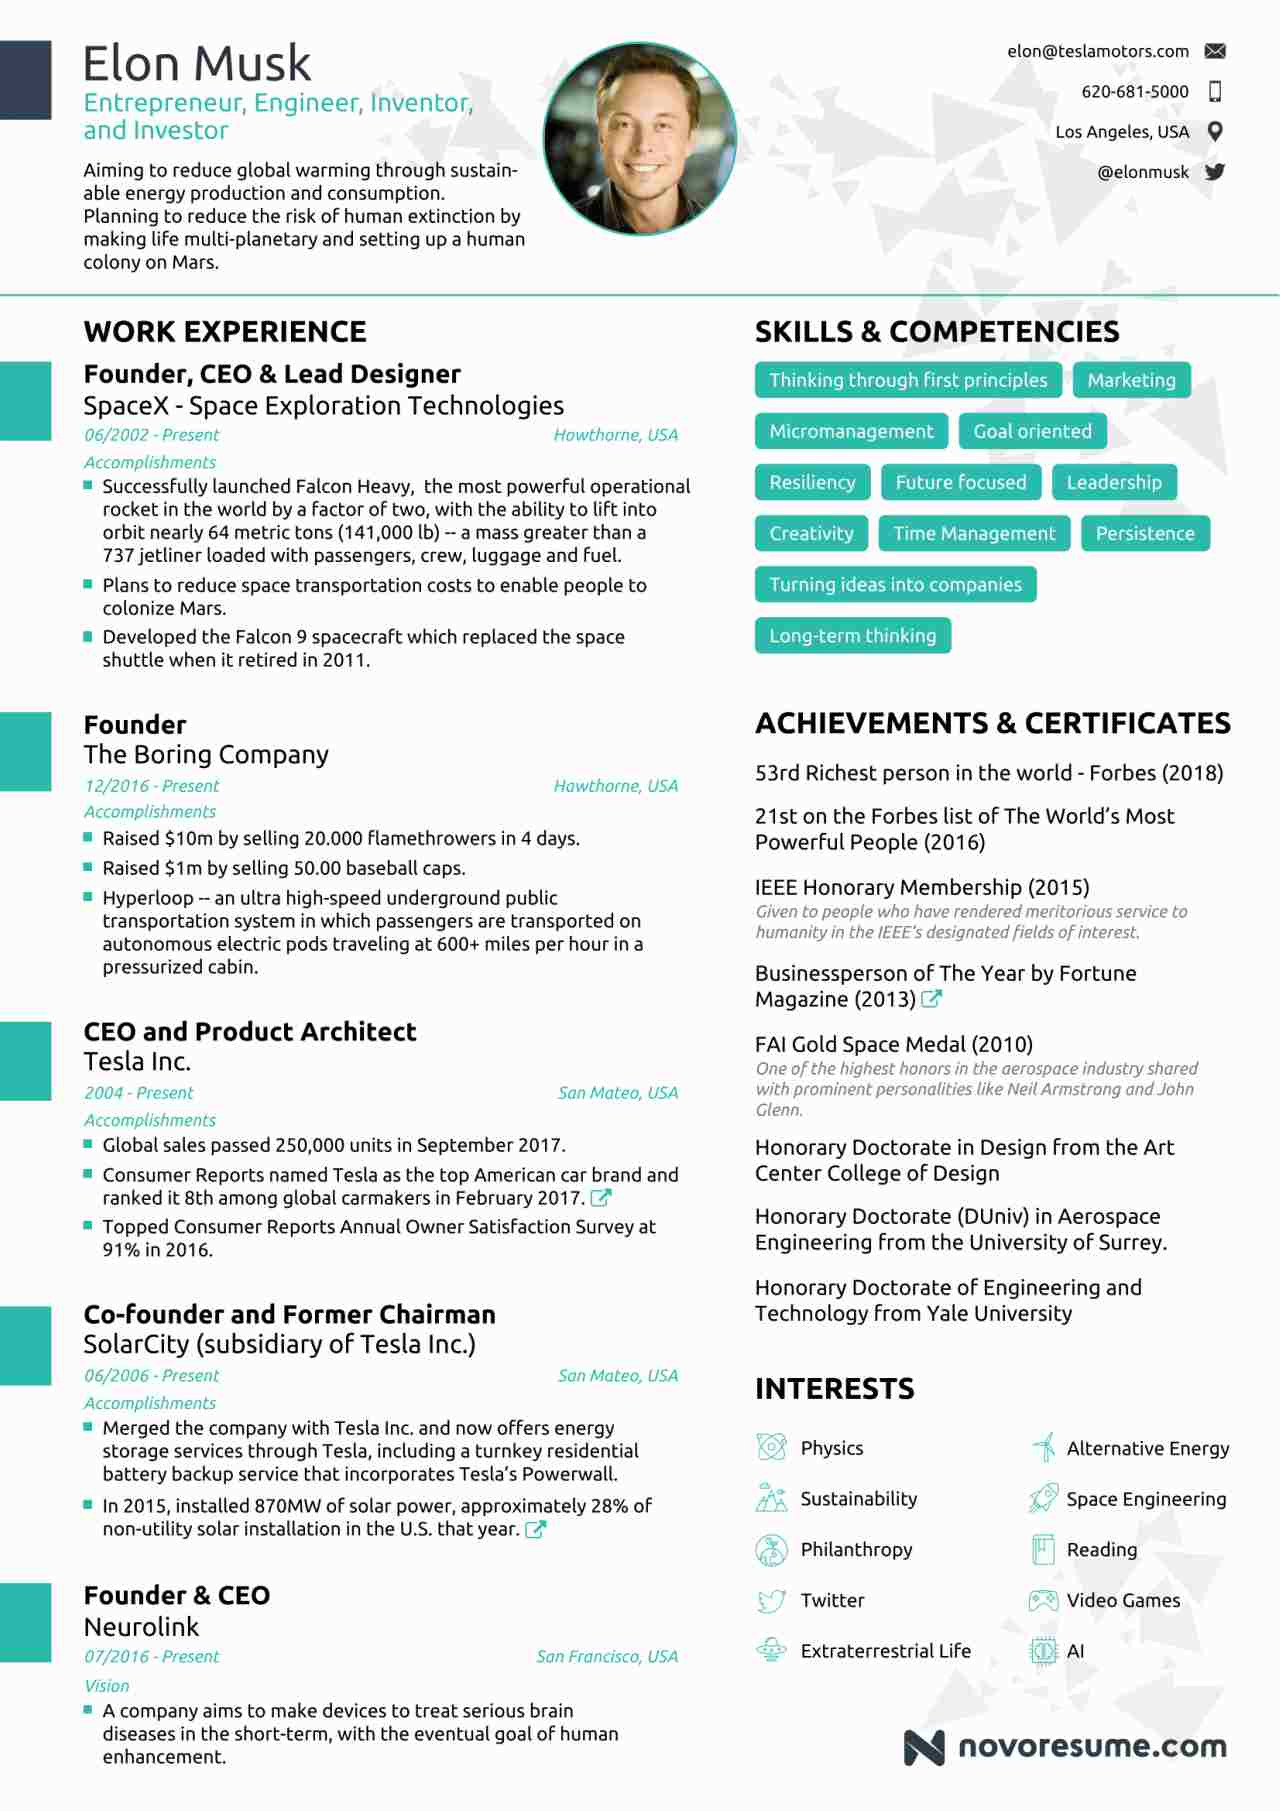 Elon Musk One Page Resume Sample Elon Musk Has A One Page Resume that We All Must Take Inspiration From